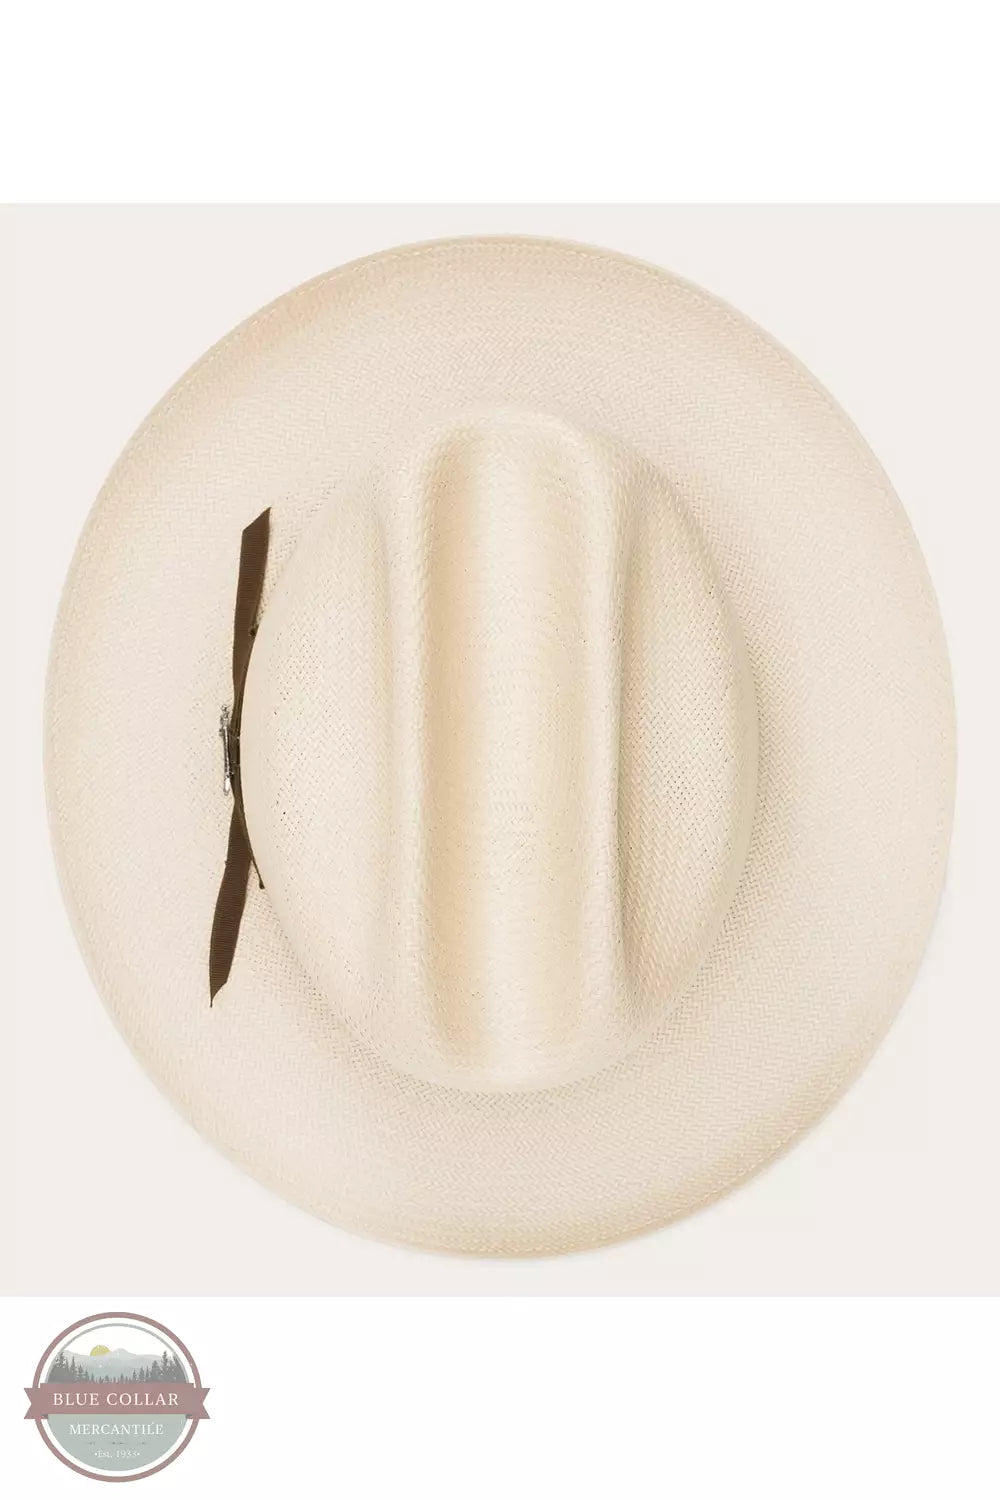 Stetson TSOPRDS0526-61-66 Open Road Western Straw Hat in Silver Belly Tope View